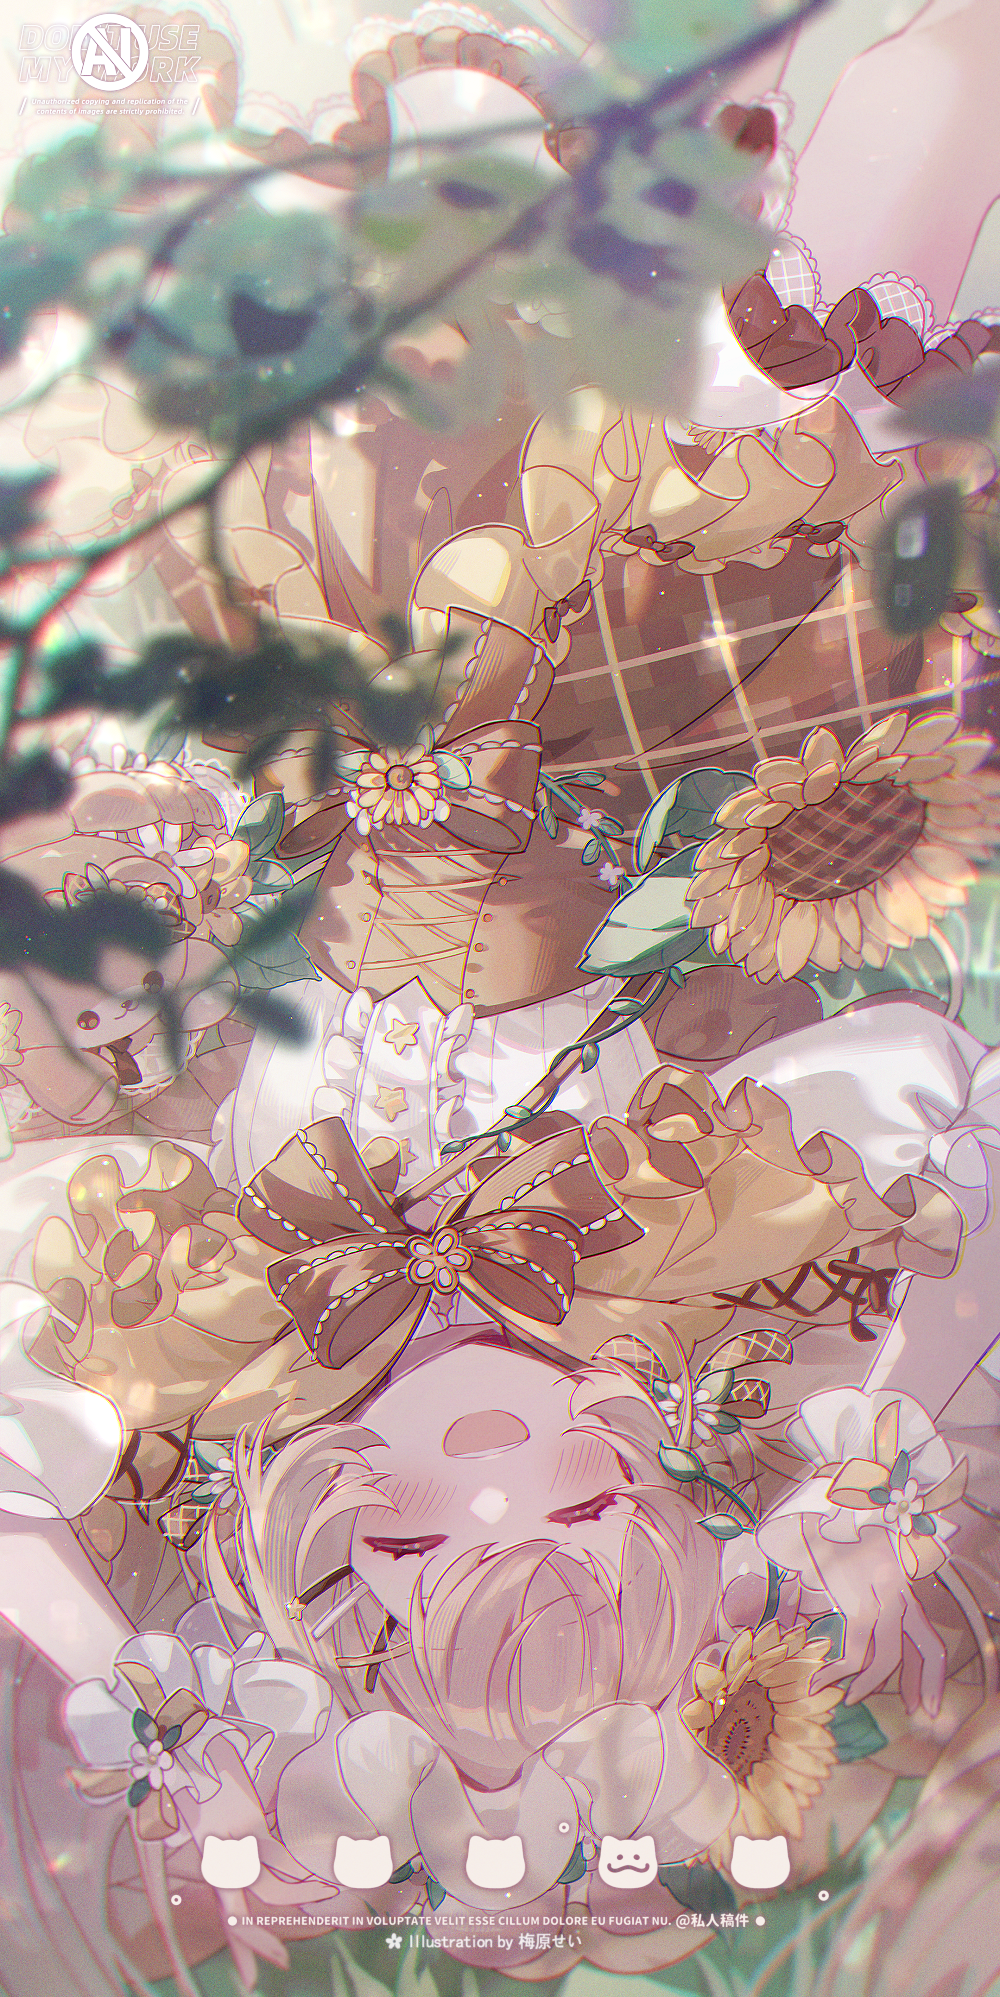 Anime 1000x1997 anime anime girls Pixiv portrait display open mouth closed eyes blushing upside down watermarked text sunflowers wrist cuffs dress doll frills frill dress leaves hair ornament plants